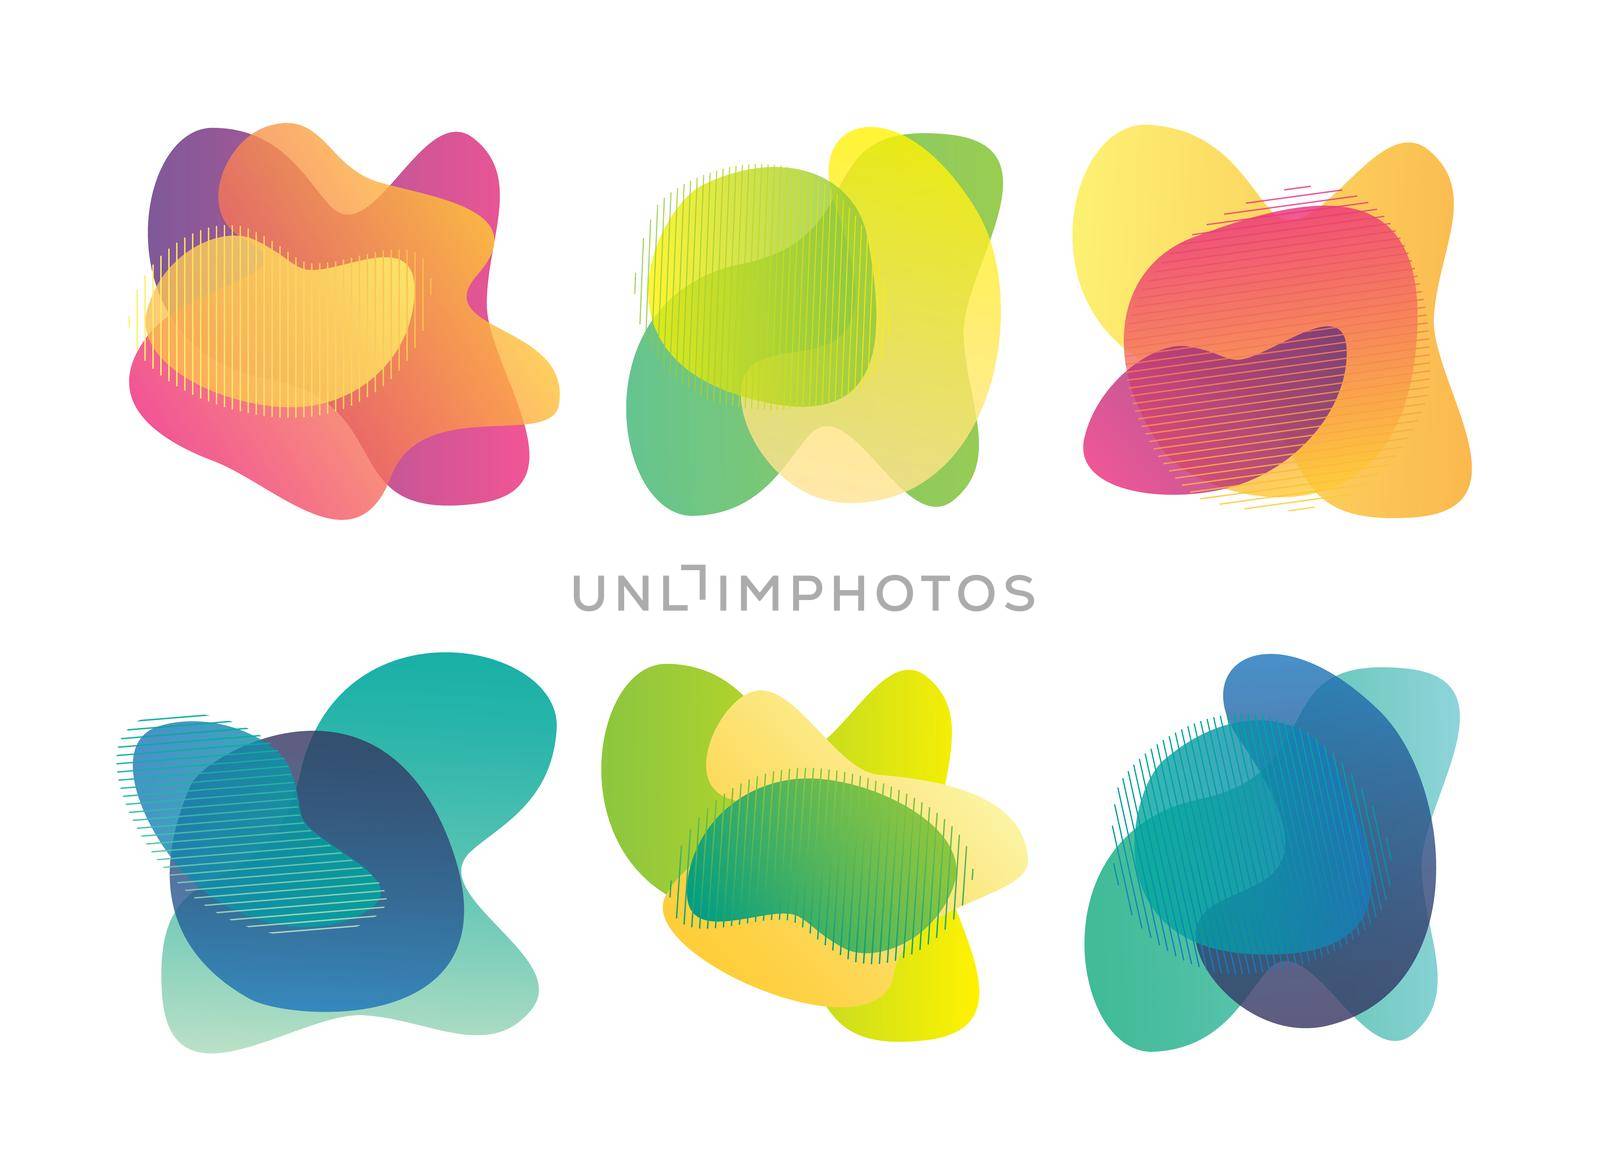 Blur free form shapes color gradient collection. Fluid organic colorful design elements. Abstract flux with soft transition effect, jpeg illustration by Fyuriy